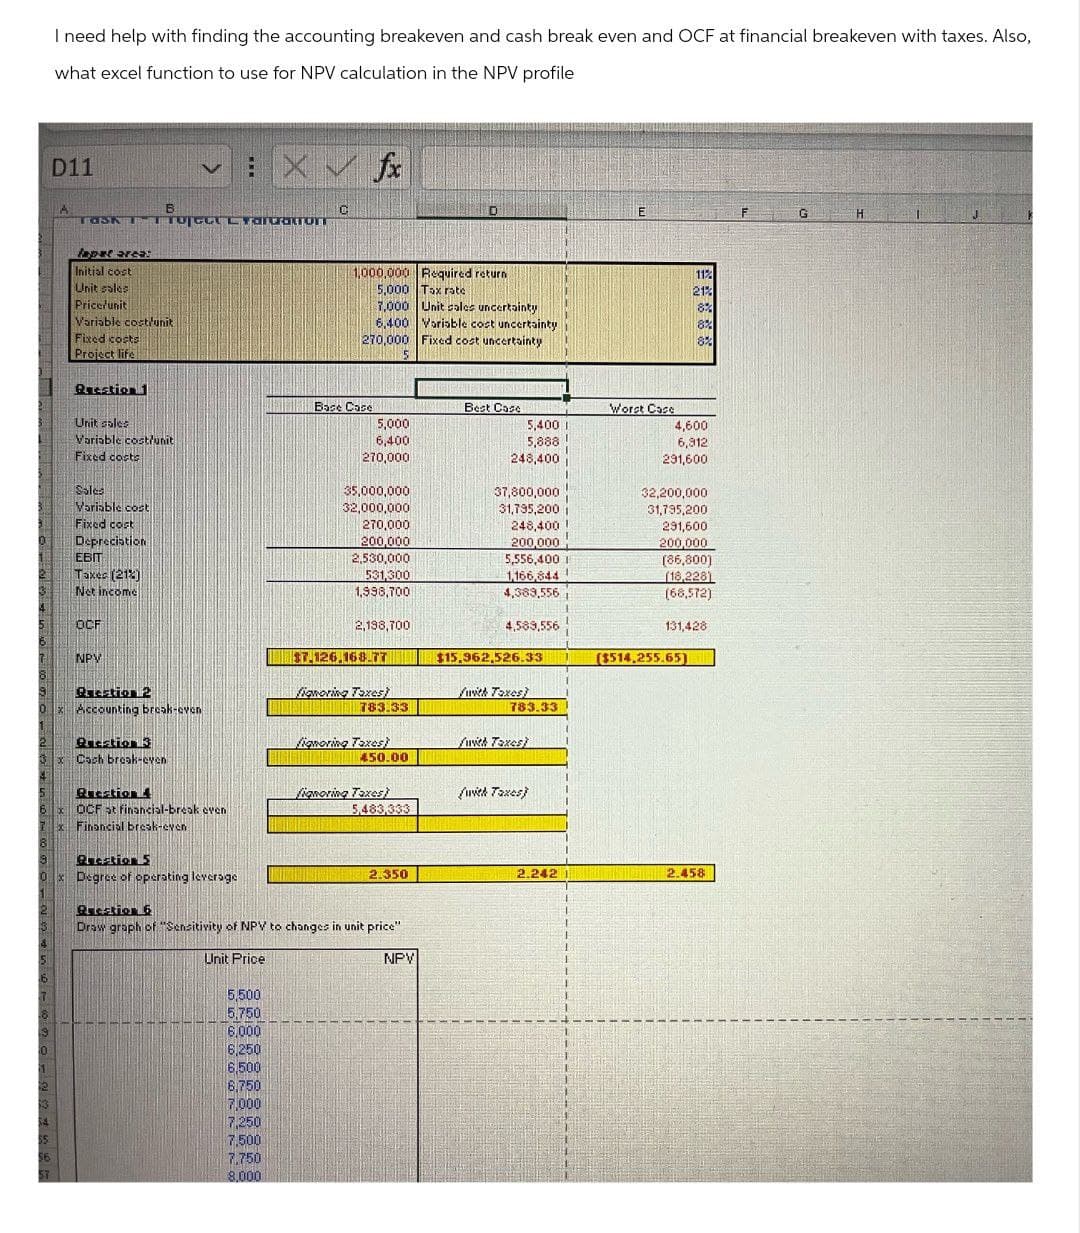 I need help with finding the accounting breakeven and cash break even and OCF at financial breakeven with taxes. Also,
what excel function to use for NPV calculation in the NPV profile
D11
XVfx
C
TOSK T
lapet area:
Initial cost
Unit sales
Price/unit
Variable cost/unit
B
TOYT
E
Fixed costs
Project life
1,000,000 Required return
11%
5,000 Tax rate
21%
7,000 Unit sales uncertainty
8%
6,400 Variable cost uncertainty
270,000
Fixed cost uncertainty
8%
5
Question 1
Base Case
Best Case
Worst Case
Unit sales
5,000
Variable cost/unit
6,400
5,400 1
5,888
4,600
6,912
Fixed costs
270,000
Sales
35,000,000
Variable cost
32,000,000
Fixed cost
270,000
Depreciation
200,000
248,400
37,800,000
31,795,200
248,400 !
200,000
32,200,000
31,795,200
291,600
291,600
200,000
EBIT
2,530,000
5,556,400
(86,800)
Taxes (21%)
Net income
OCF
531,300
1,166,844
(18,228)
1,998,700
4,389,556
(68,572)
2,138,700
4,589,556
131,428
NPV
$7.126.168.77
$15,962,526.33
($514,255.65)
Question 2
fignoring Taxes
with Taxes)
x Accounting break-even
783.33
783.33
Question 3
fignoring Taxes)
with Taxes)
x Cach break-even
450.00
Question 4
fignoring Taxes)
(with Taxes)
x OCF at financial-break even
7x Financial break-even
5,483,333
Question 5
2.350
2.242
2.458
x Degree of operating leverage
Greation 6
Draw graph of "Sensitivity of NPV to changes in unit price"
Unit Price
5,500
5,750
6,000
6,250
6,500
6,750
7,000
7,250
$5
7,500
$6
7.750
57
8,000
NPV